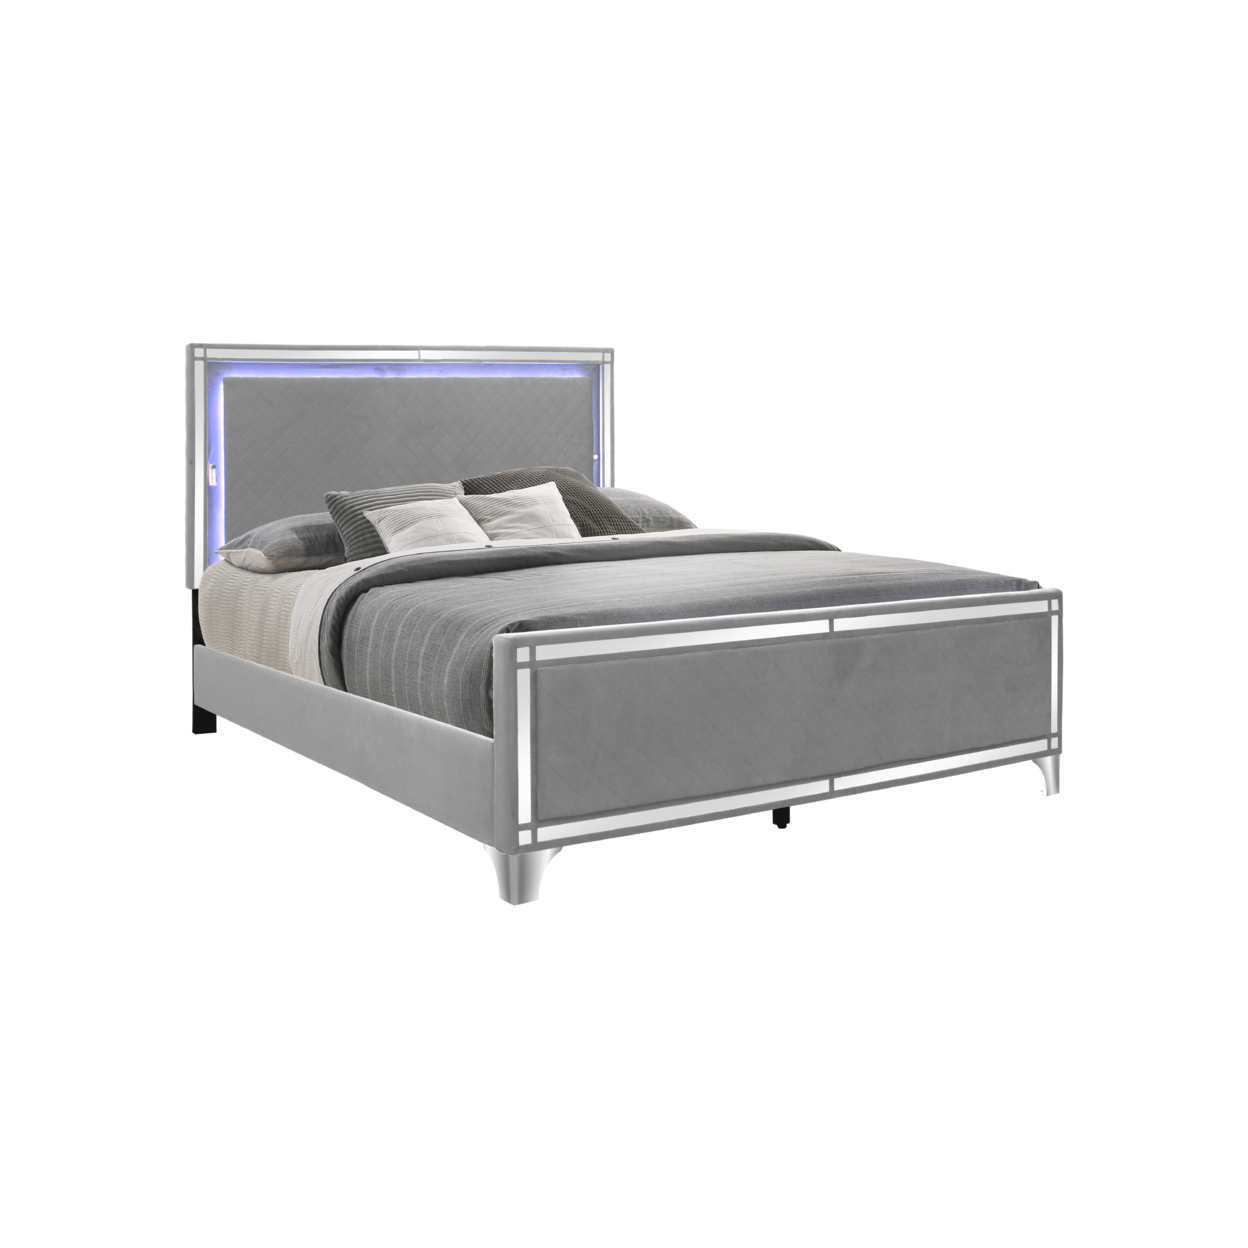 Linda Queen Size LED Bed made with Wood in Gray Finish